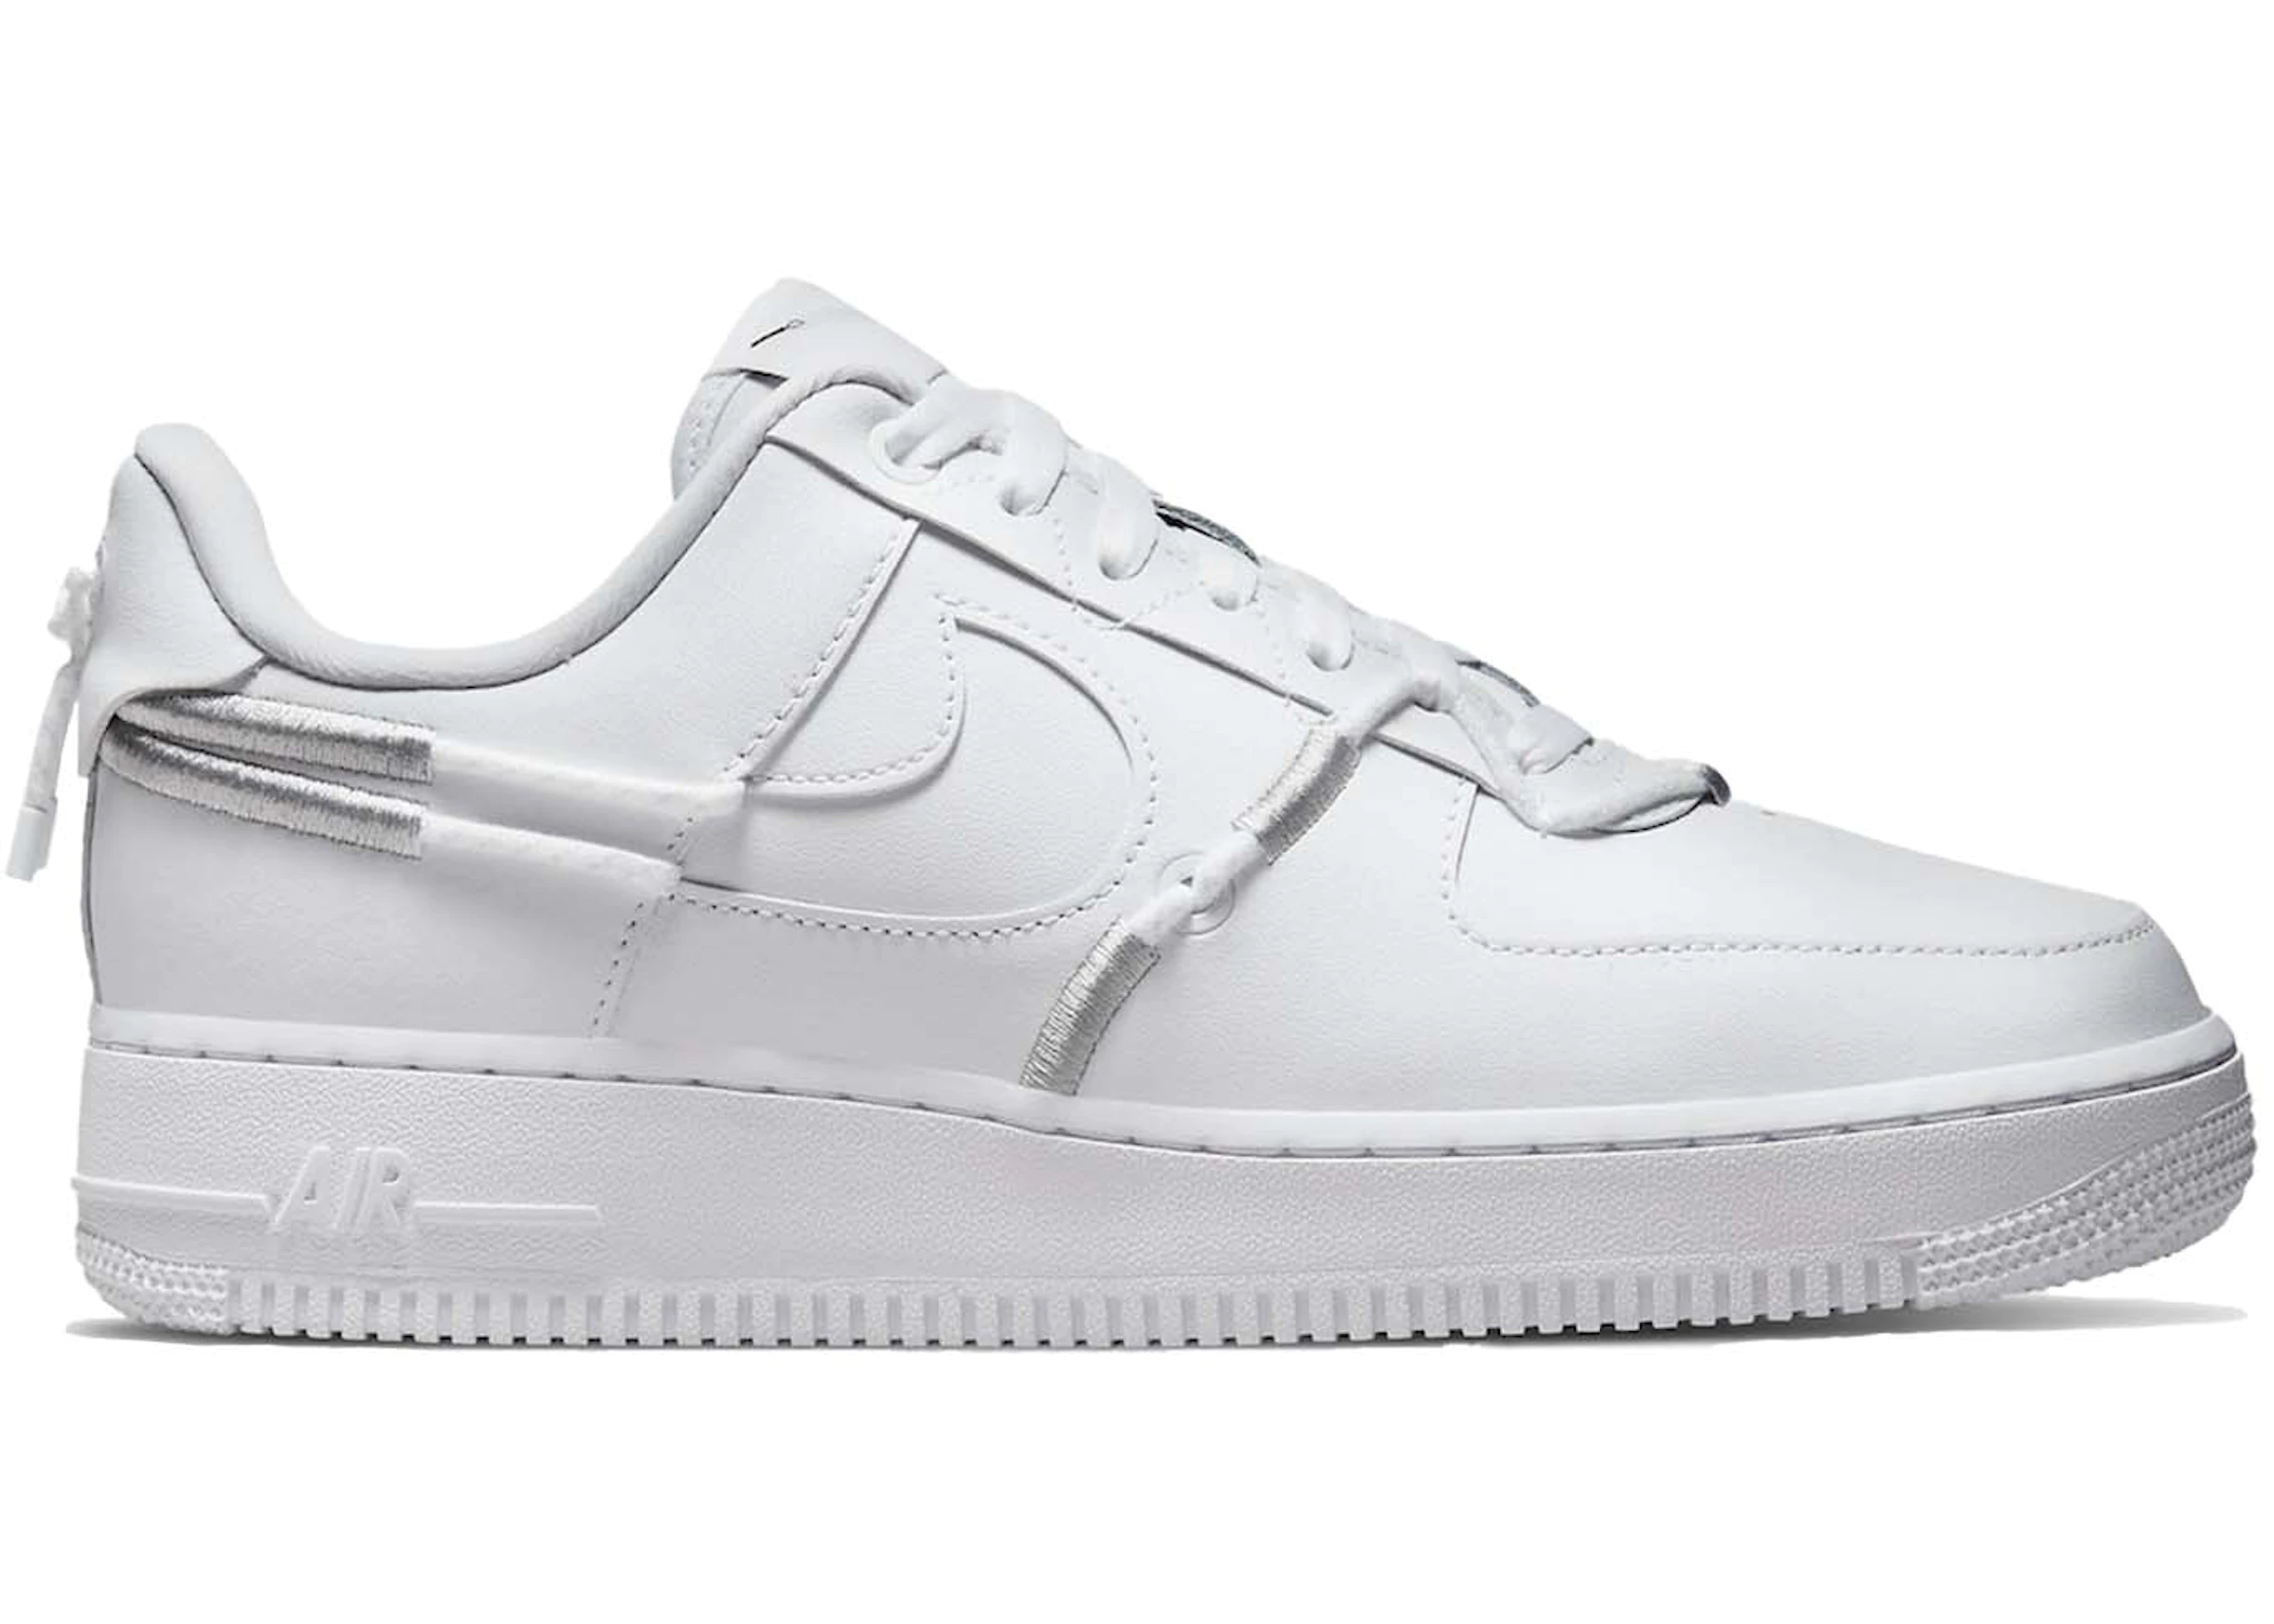 Sightseeing Dean Resembles Nike Air Force 1 Low '07 LX Triple White (W) - DH4408-101 - US